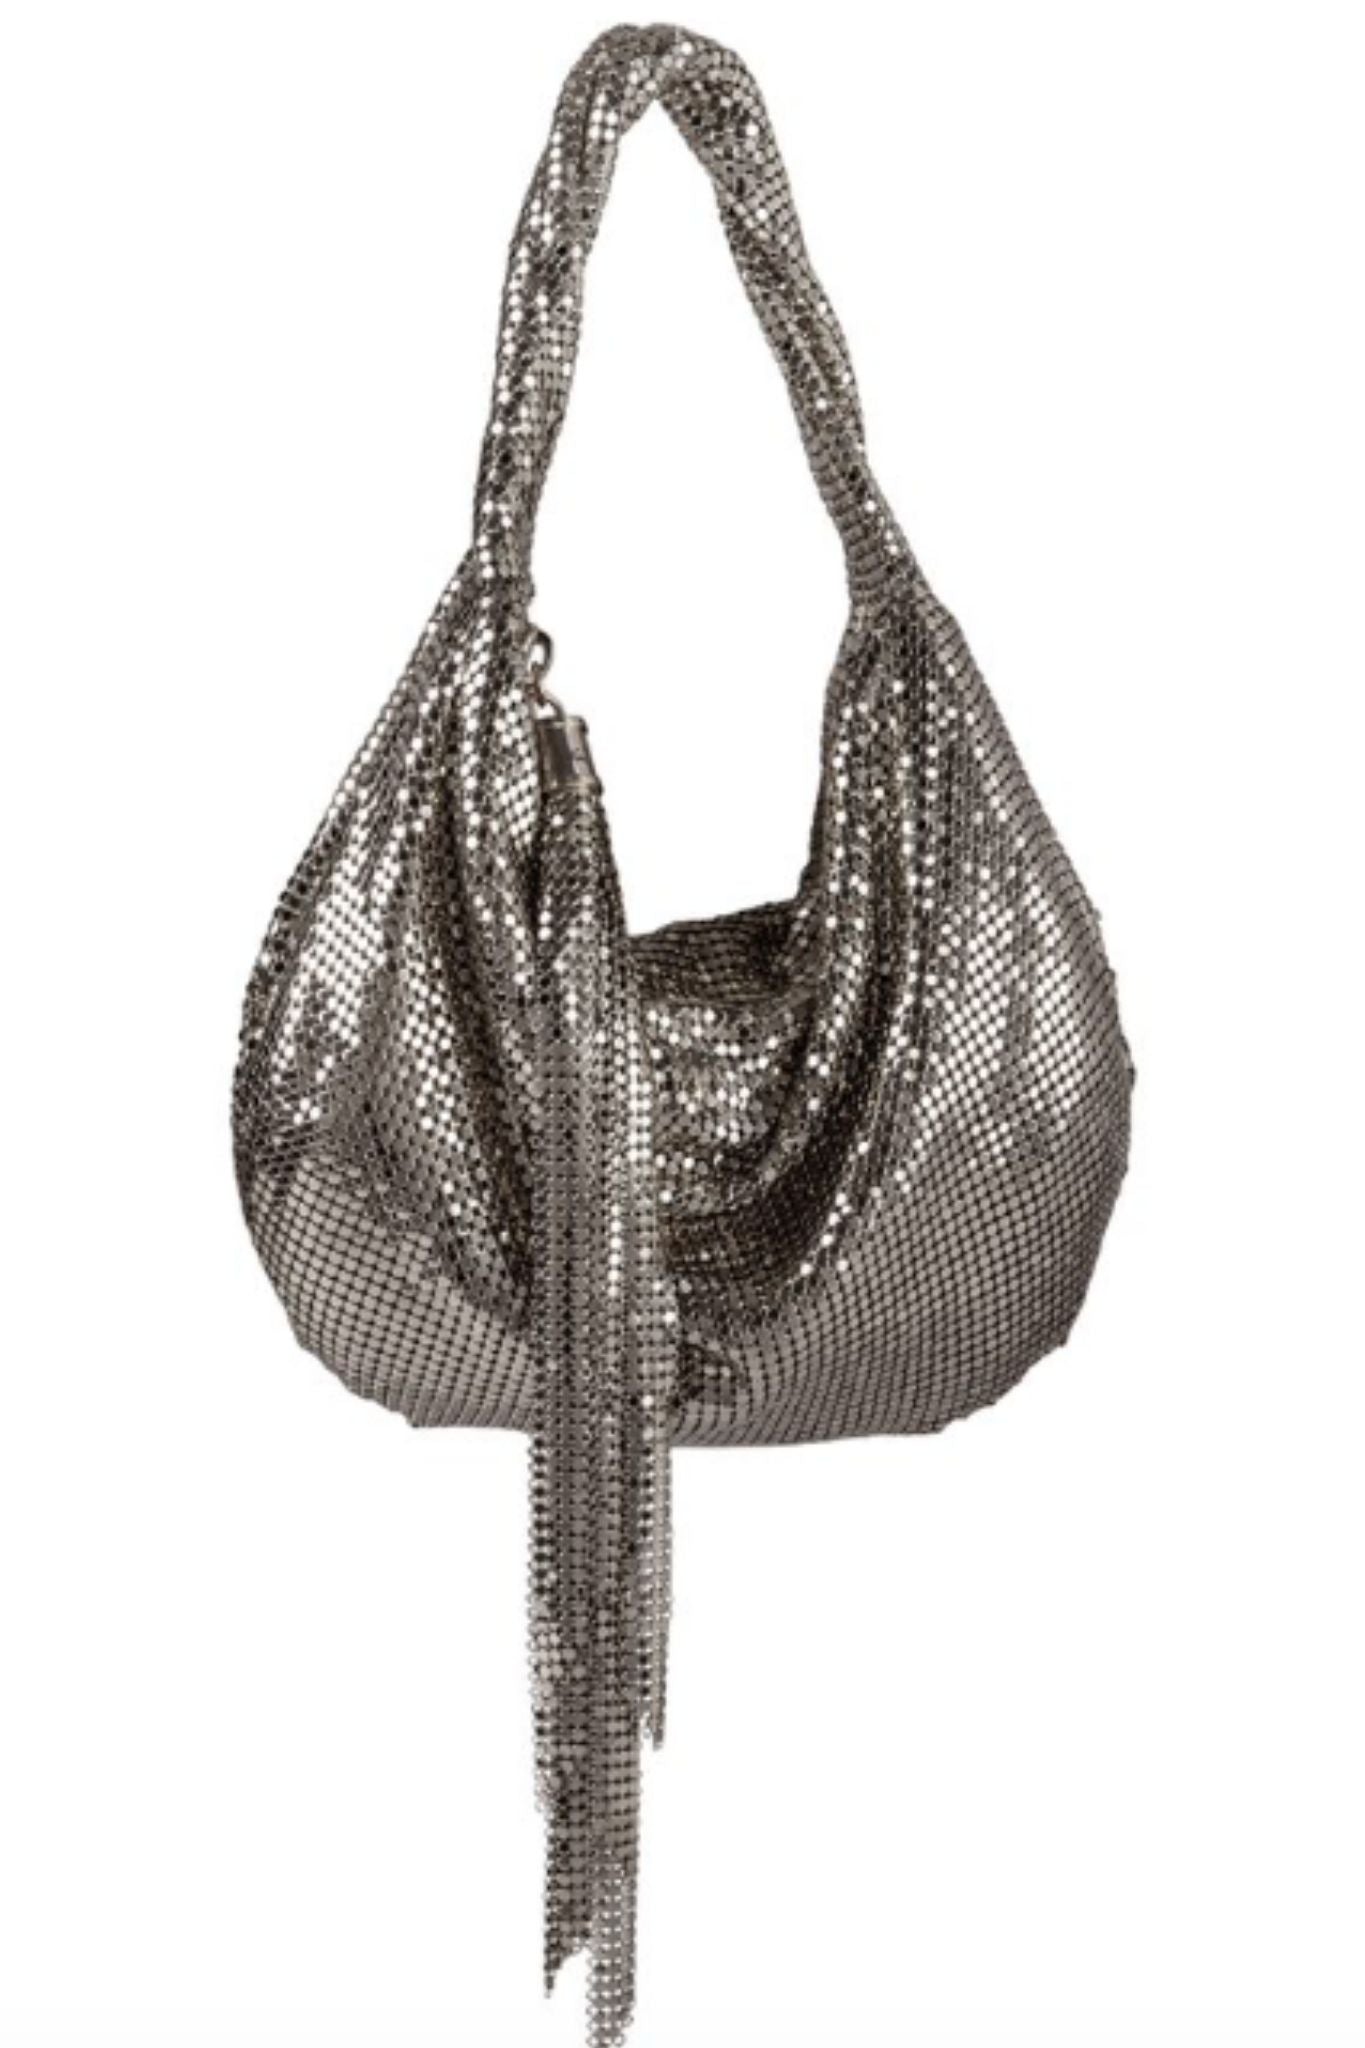 Marisol Mesh Hobo Bag in Gunmetal by Whiting and Davis - RENTAL – The ...